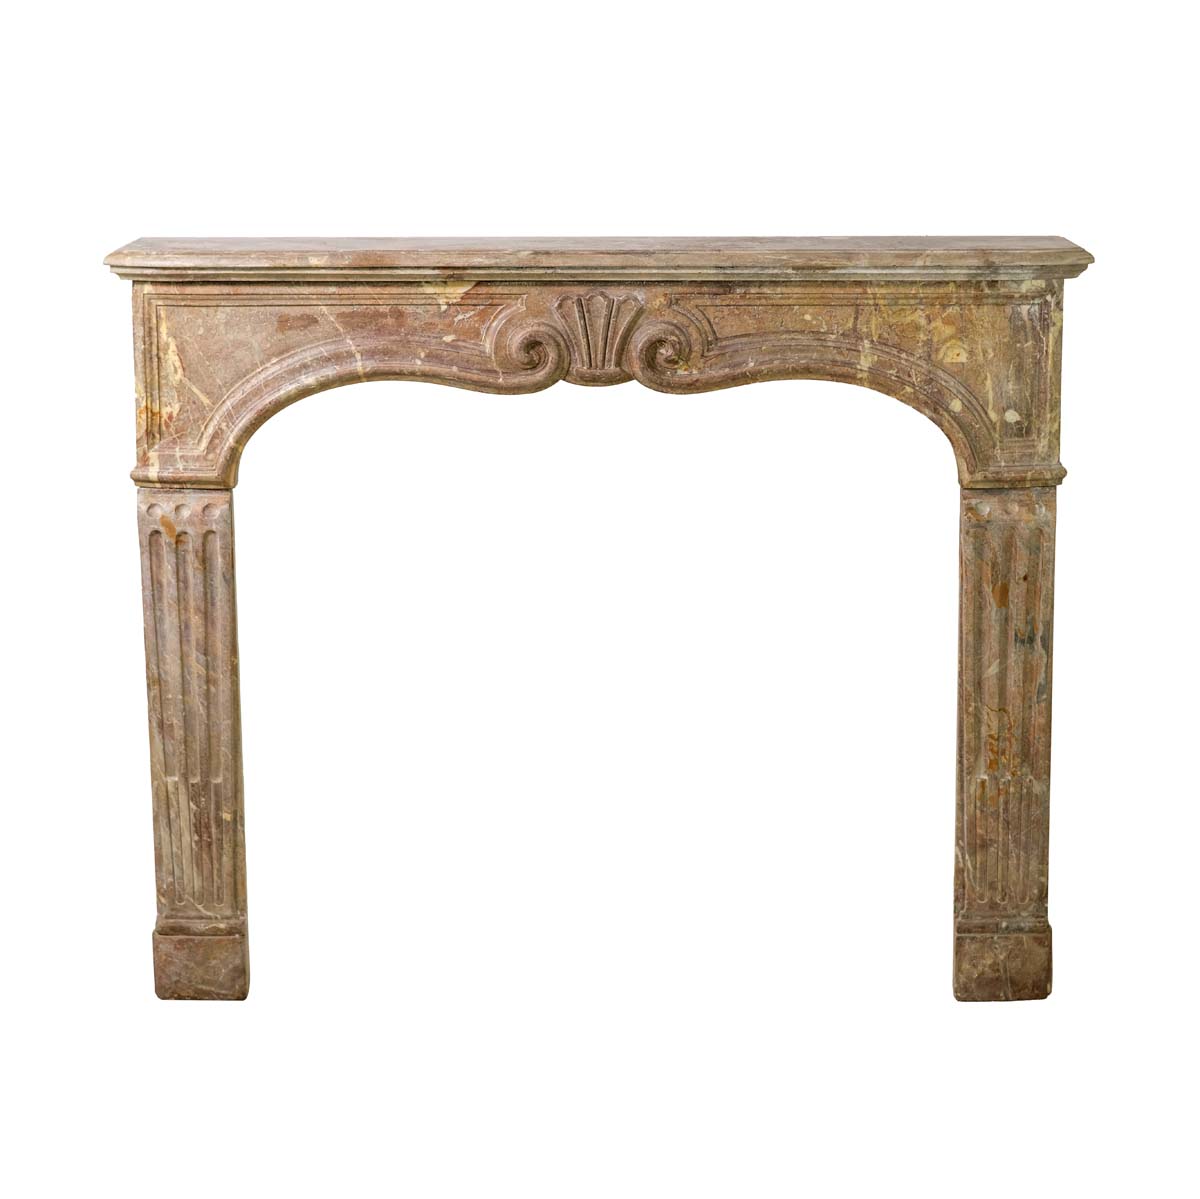 Patatas Nube eximir Antique Mantels & Fireplaces | Olde Good Things